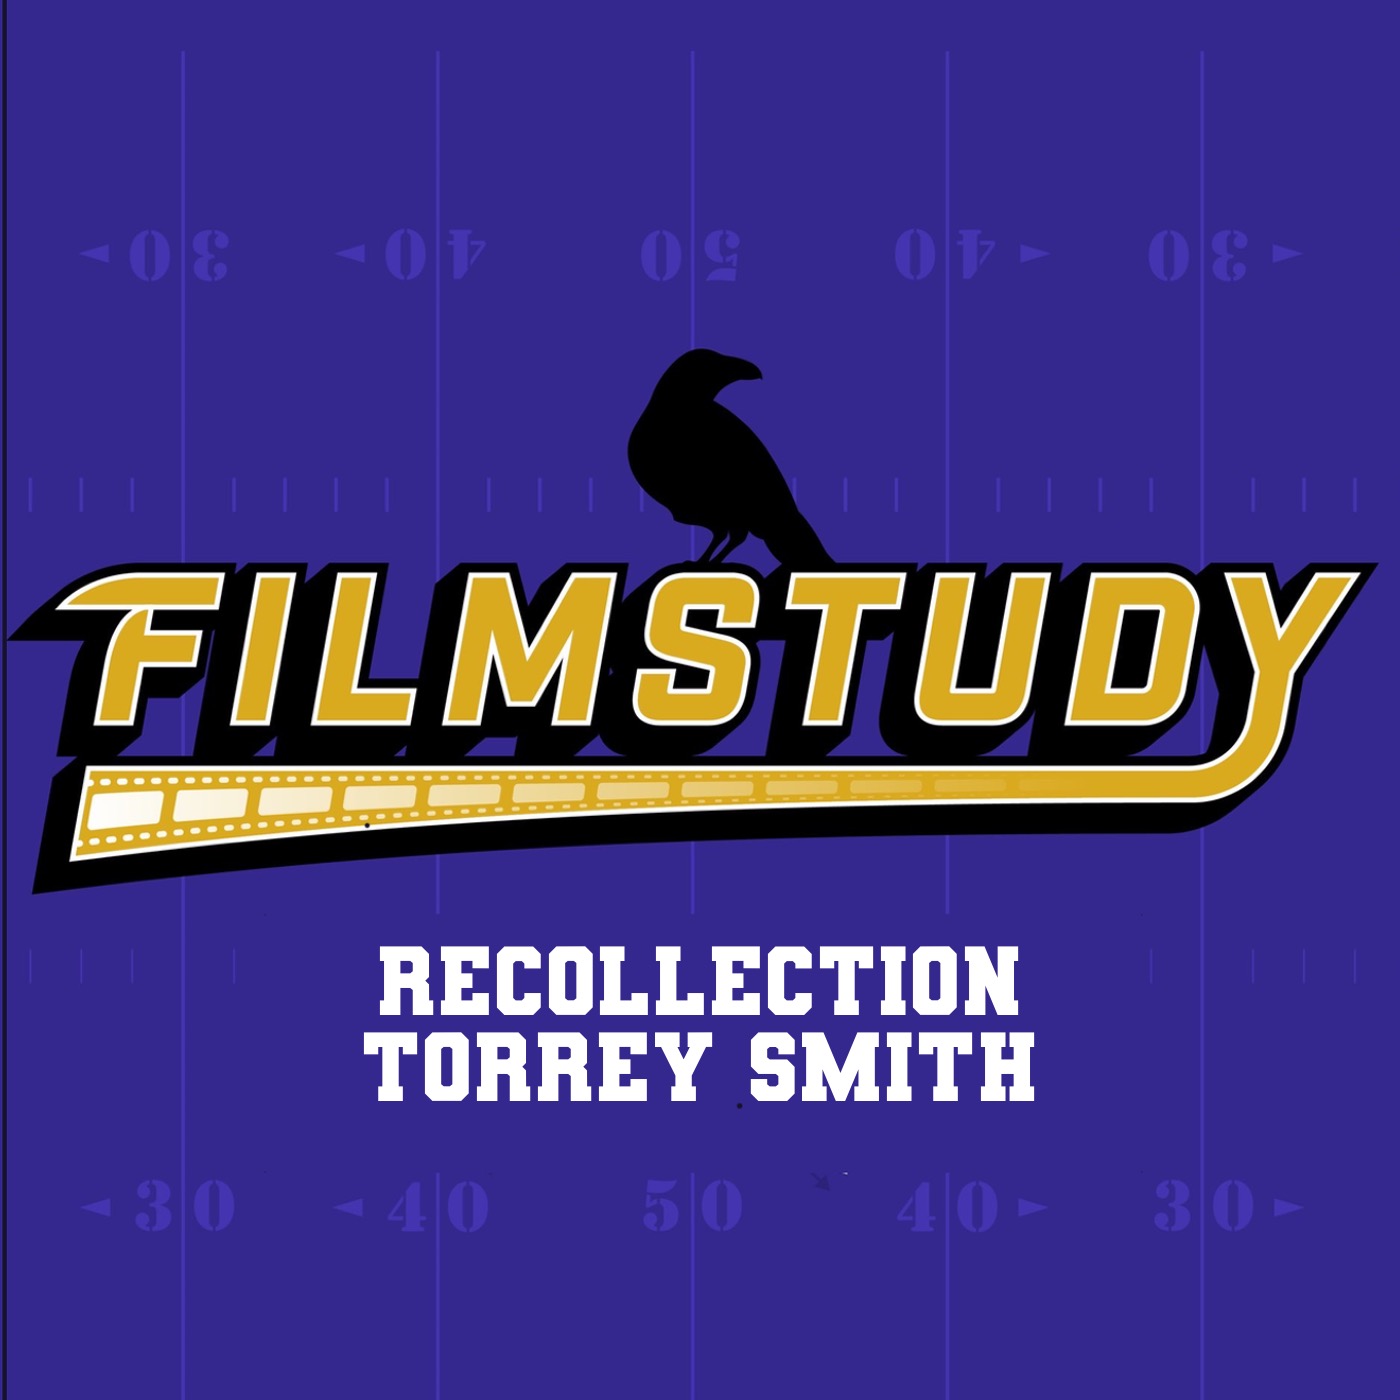 Recollections : Torrey Smith